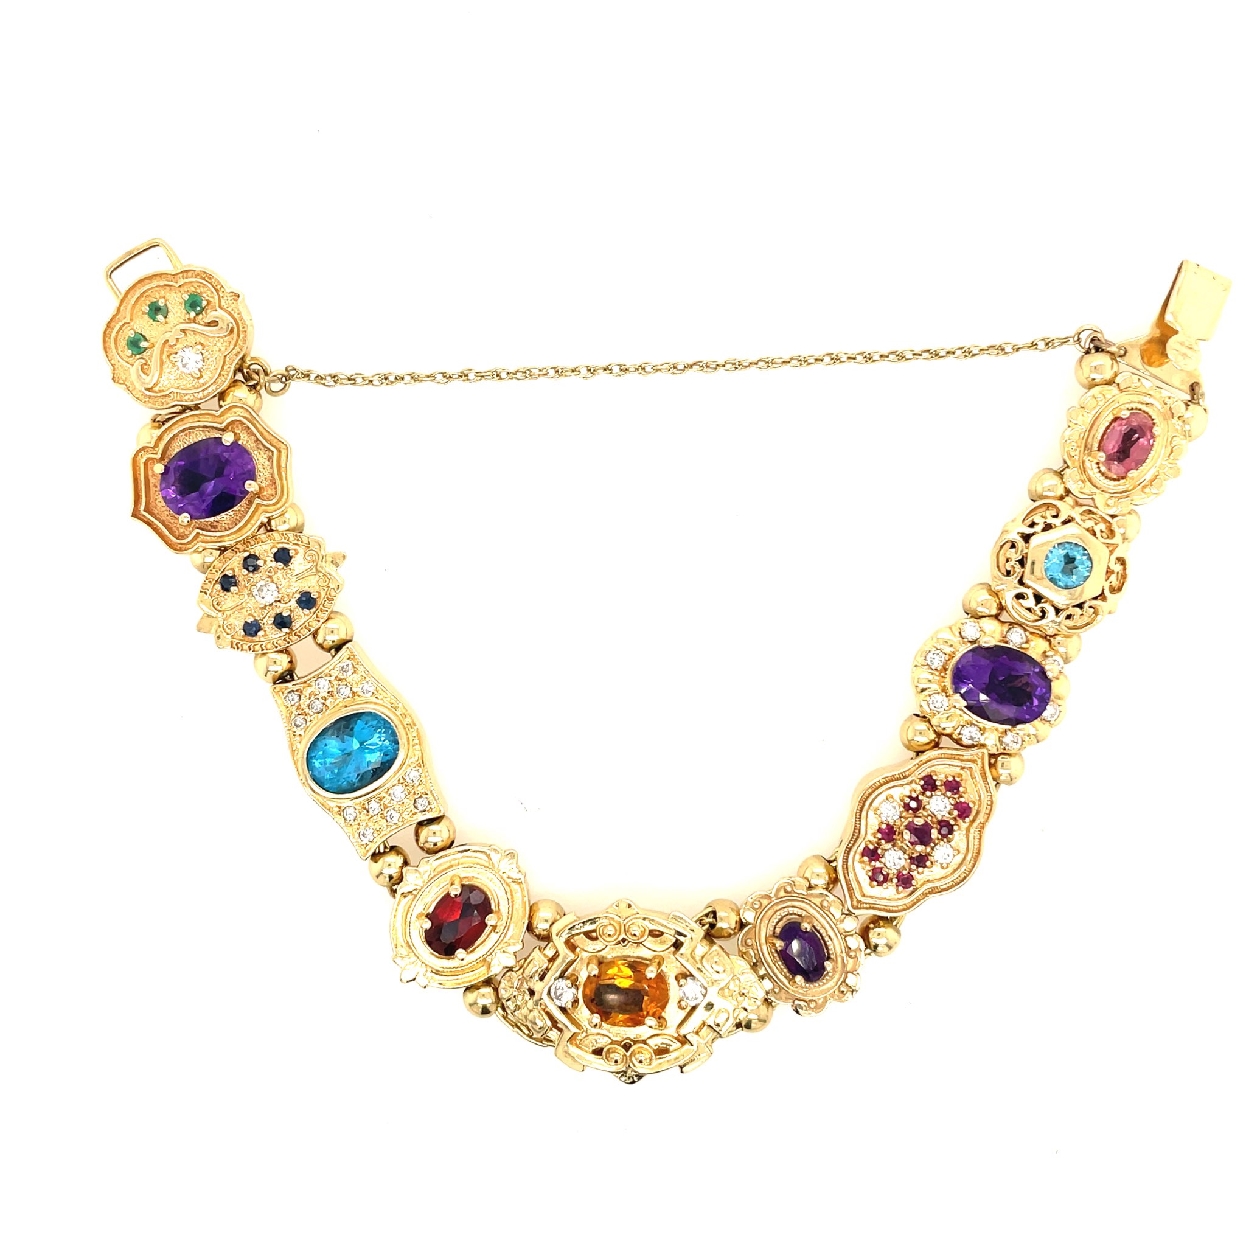 14K Yellow Gold Victorian Slide Bracelet with Multicolor Stones